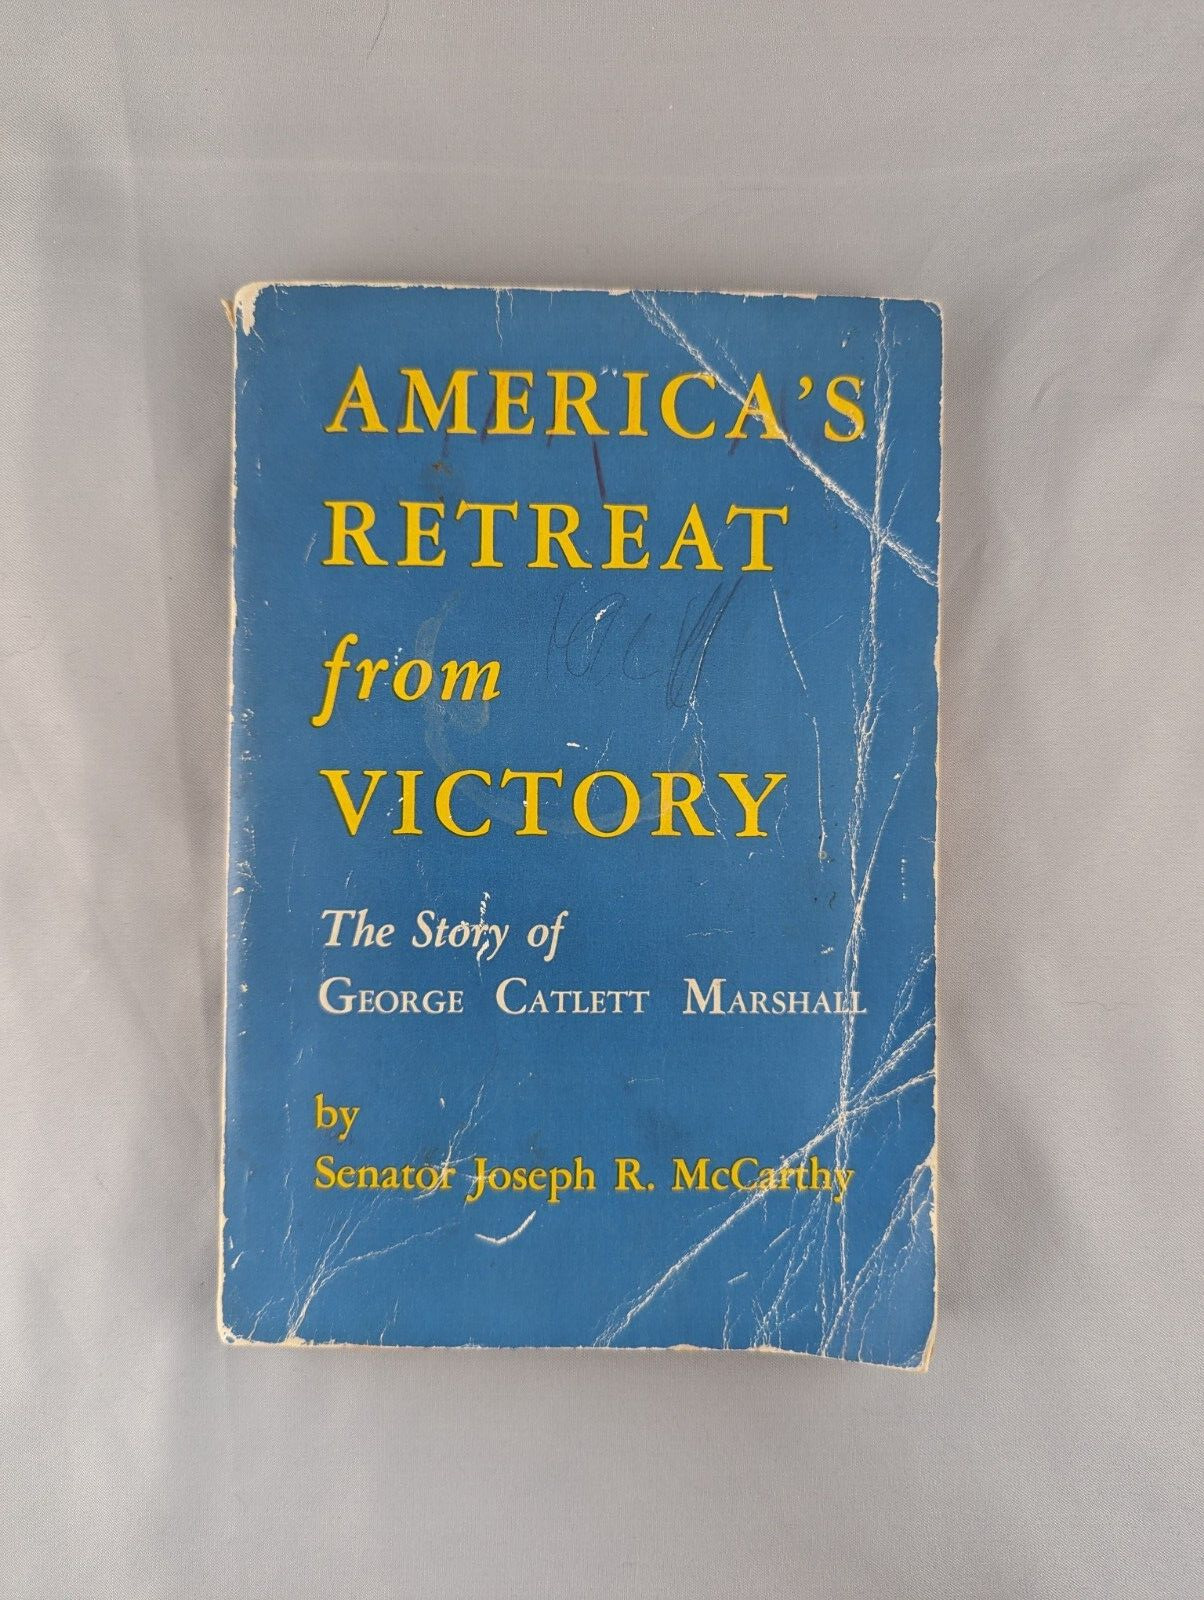 SIGNED America's Retreat From Victory by Sen. Joseph R. McCarthy 1951